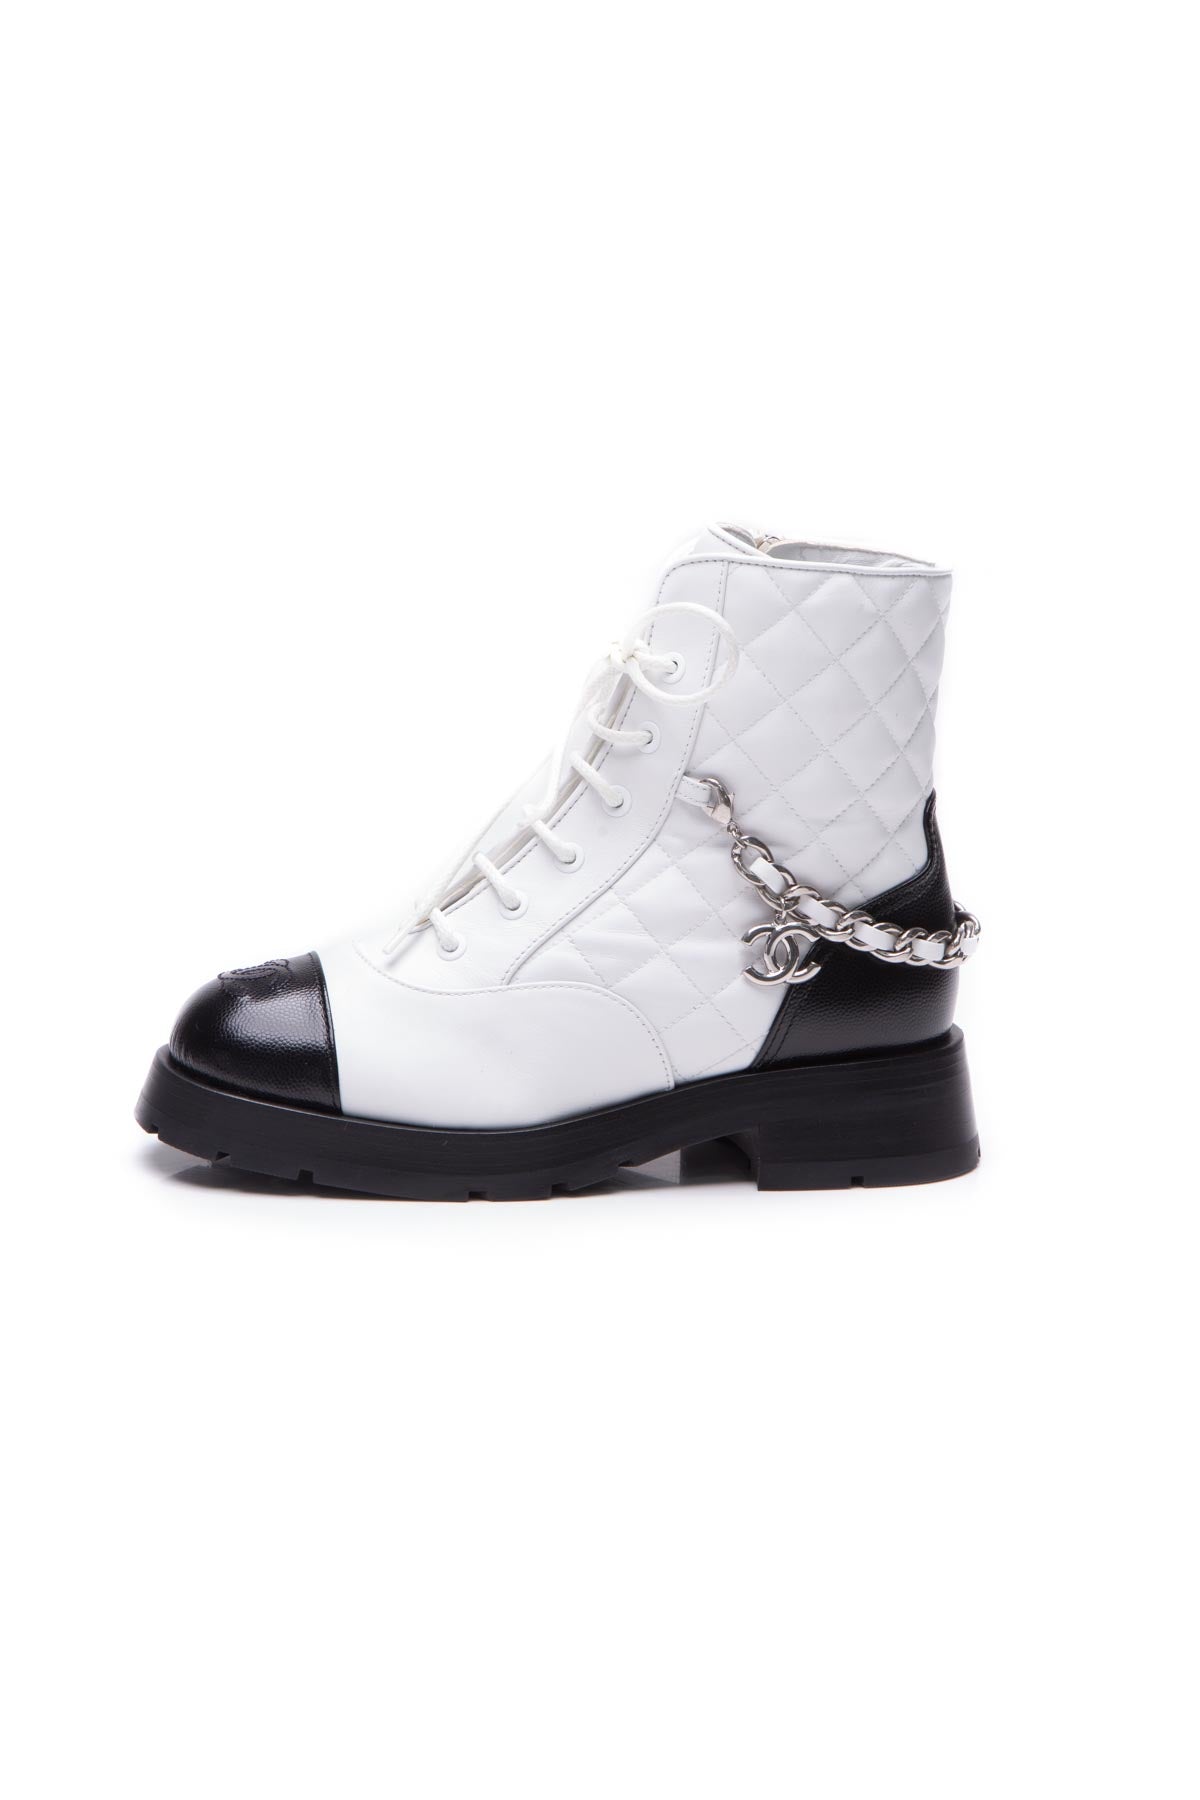 Chanel RUNWAY Embellished Chain Boots with Leather Gaiters ASO Miley   circe